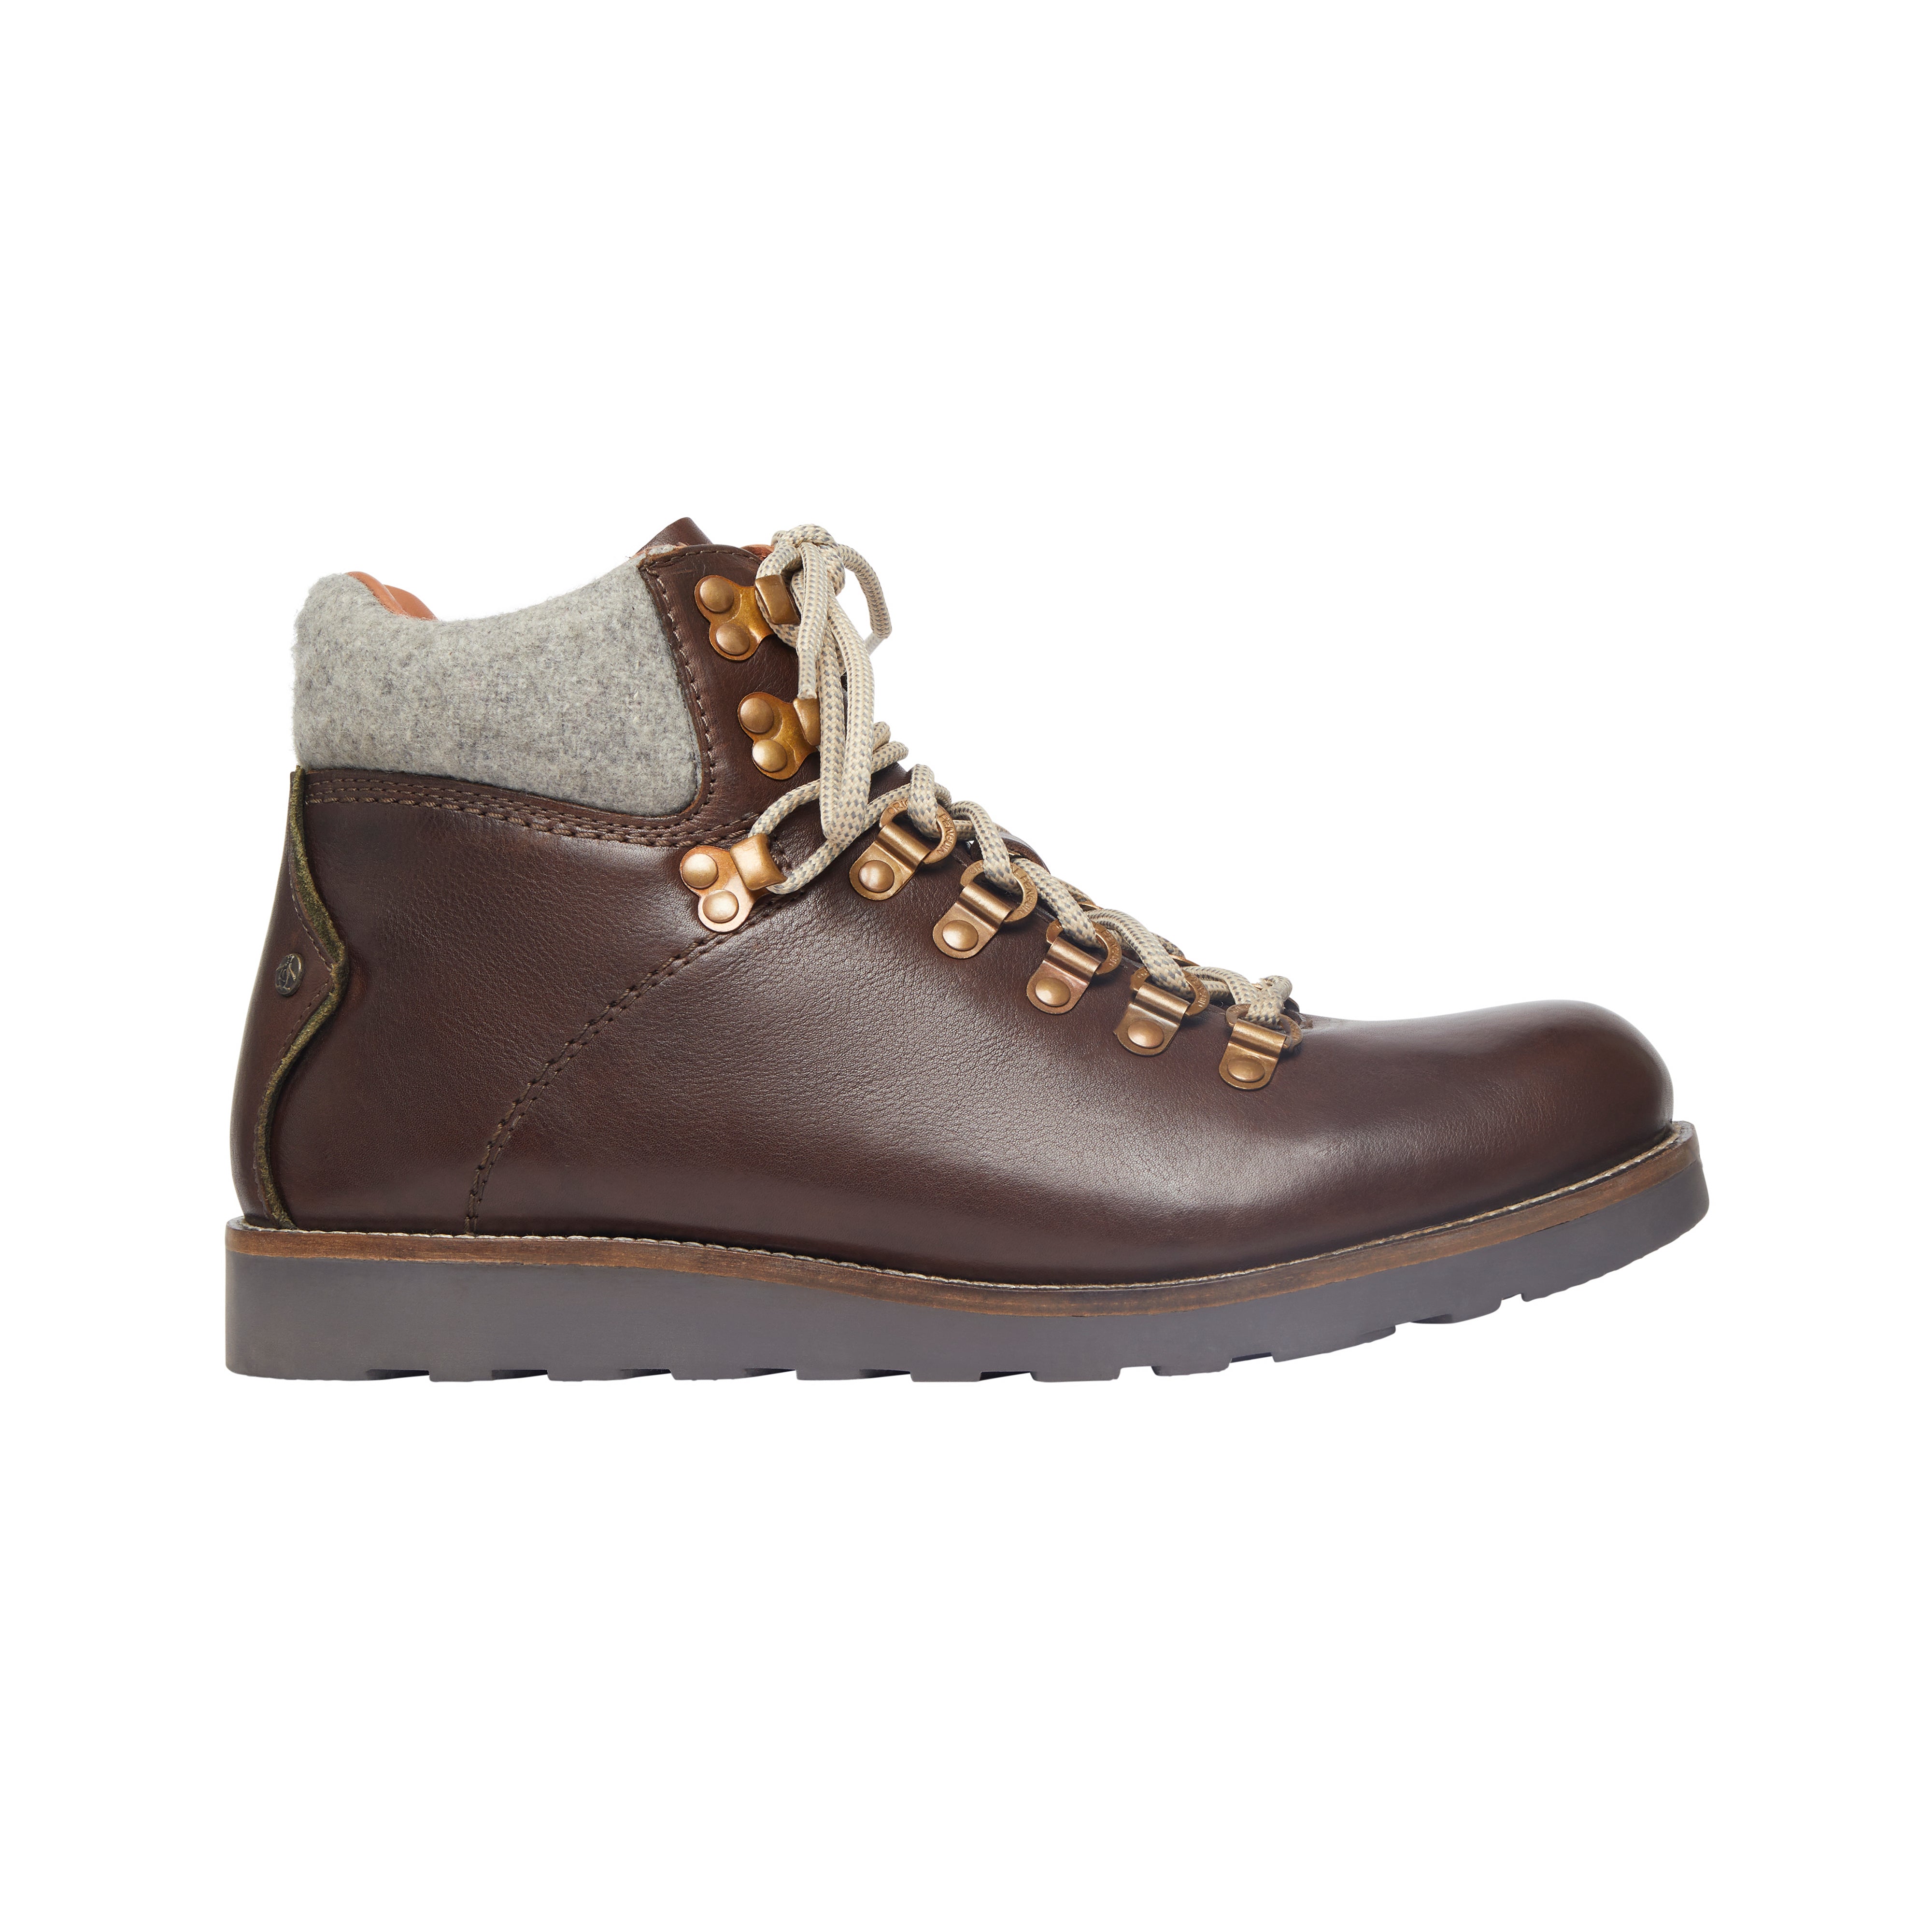 View Anish Boot In Leather Brown information